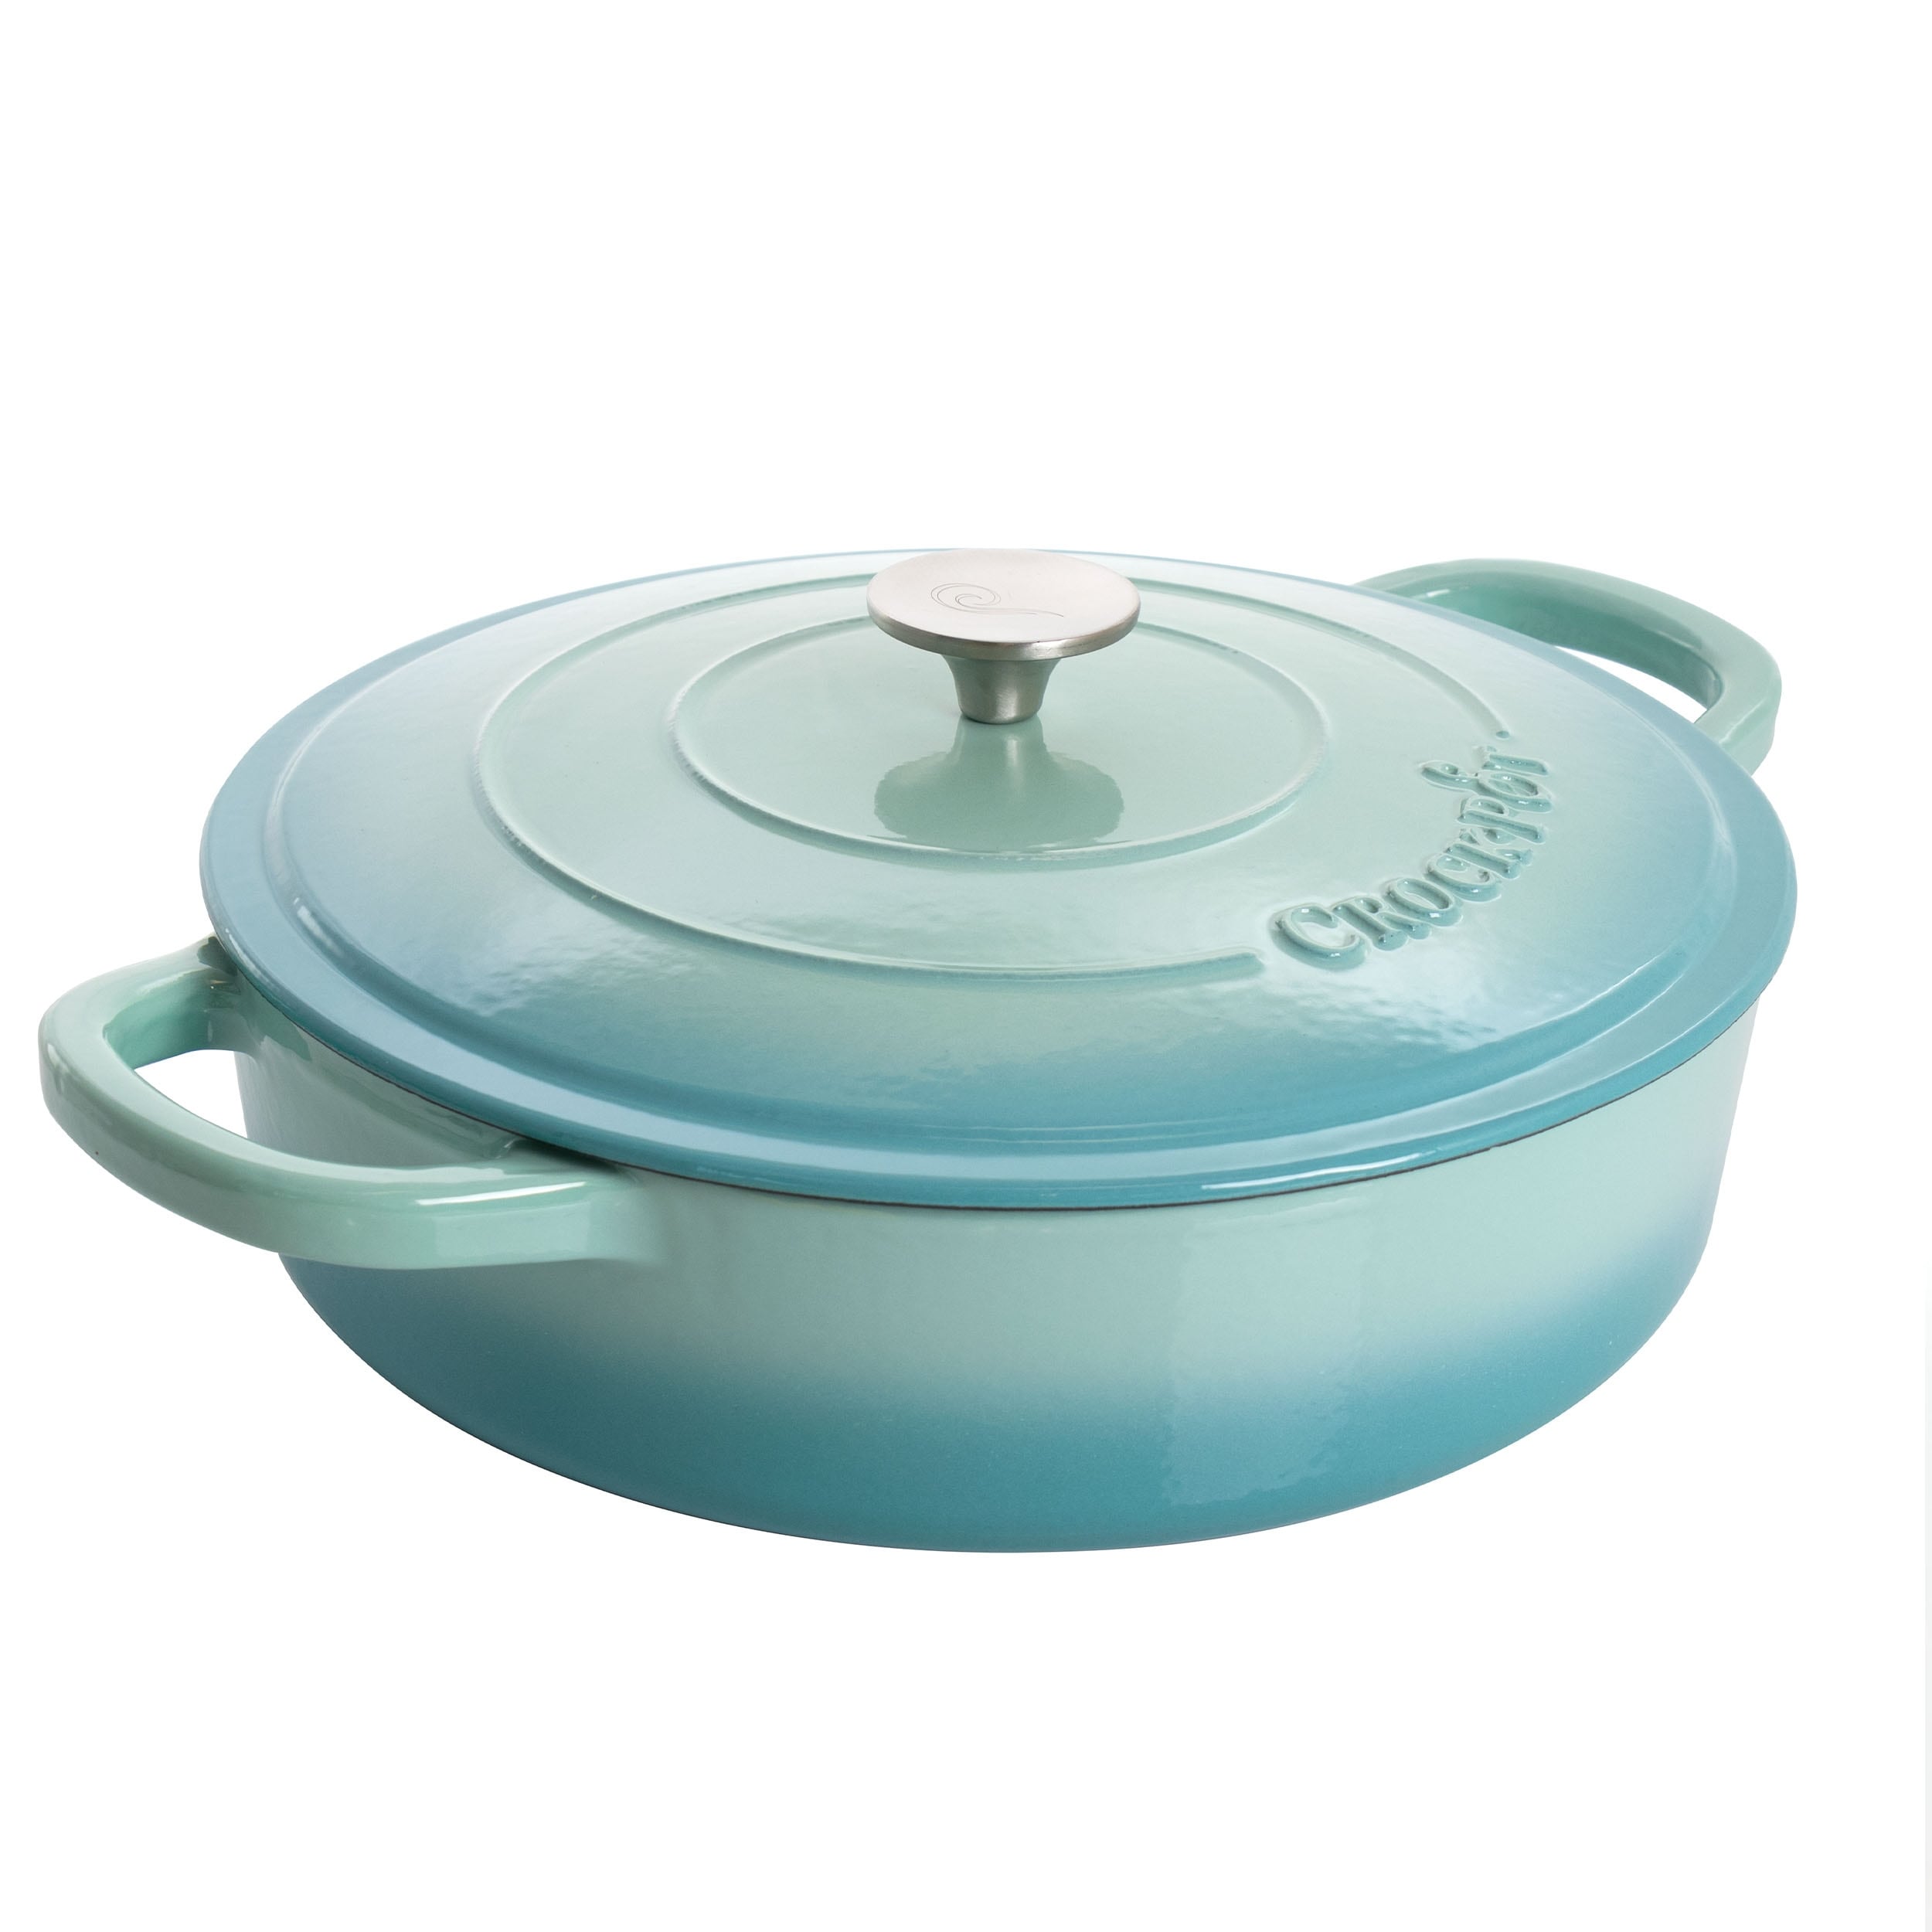 https://ak1.ostkcdn.com/images/products/is/images/direct/4decd0157ea6087c8924923d05f9d734bc9cabdf/5-Quart-Round-Enameled-Cast-Iron-Braiser-Pan-With-Lid-in-Arctic-Teal.jpg